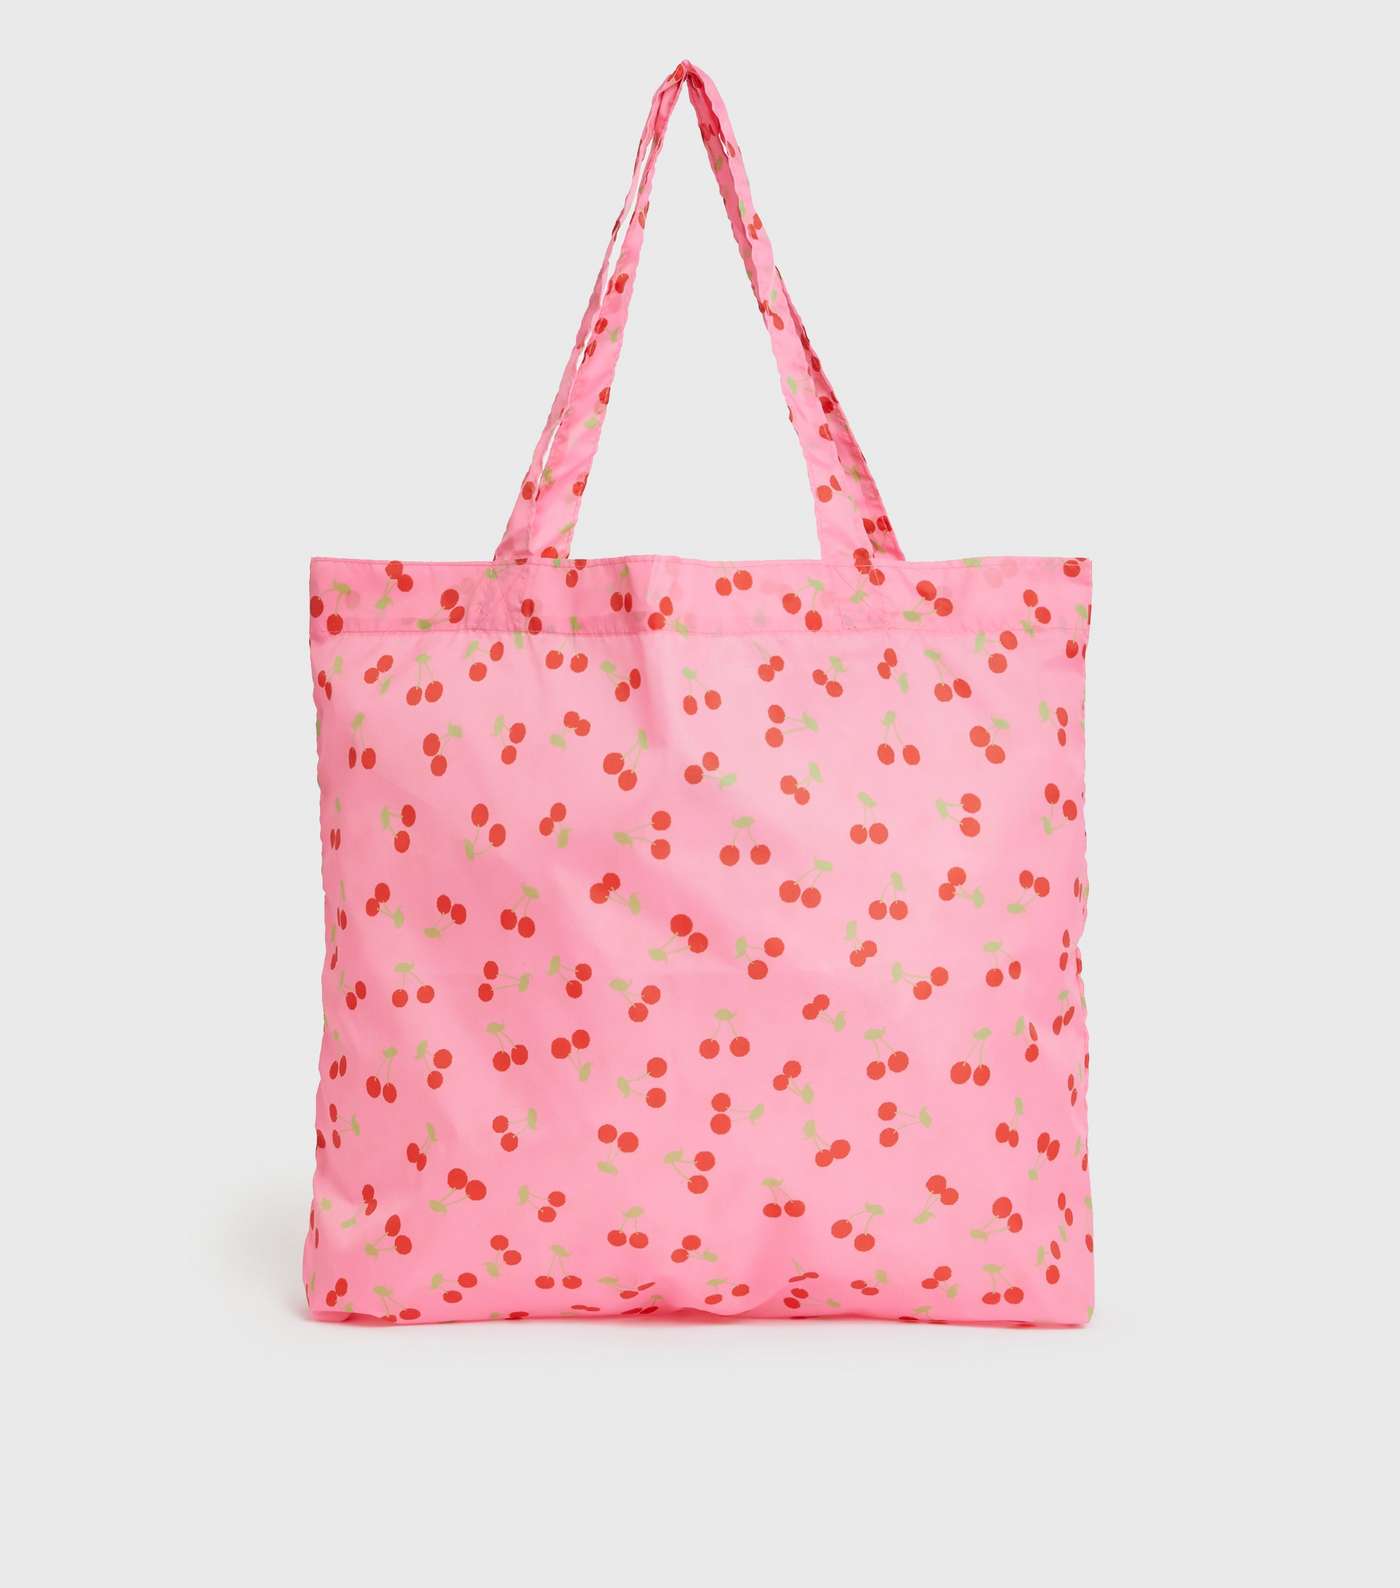 PIECES Pink Cherry Tote Bag